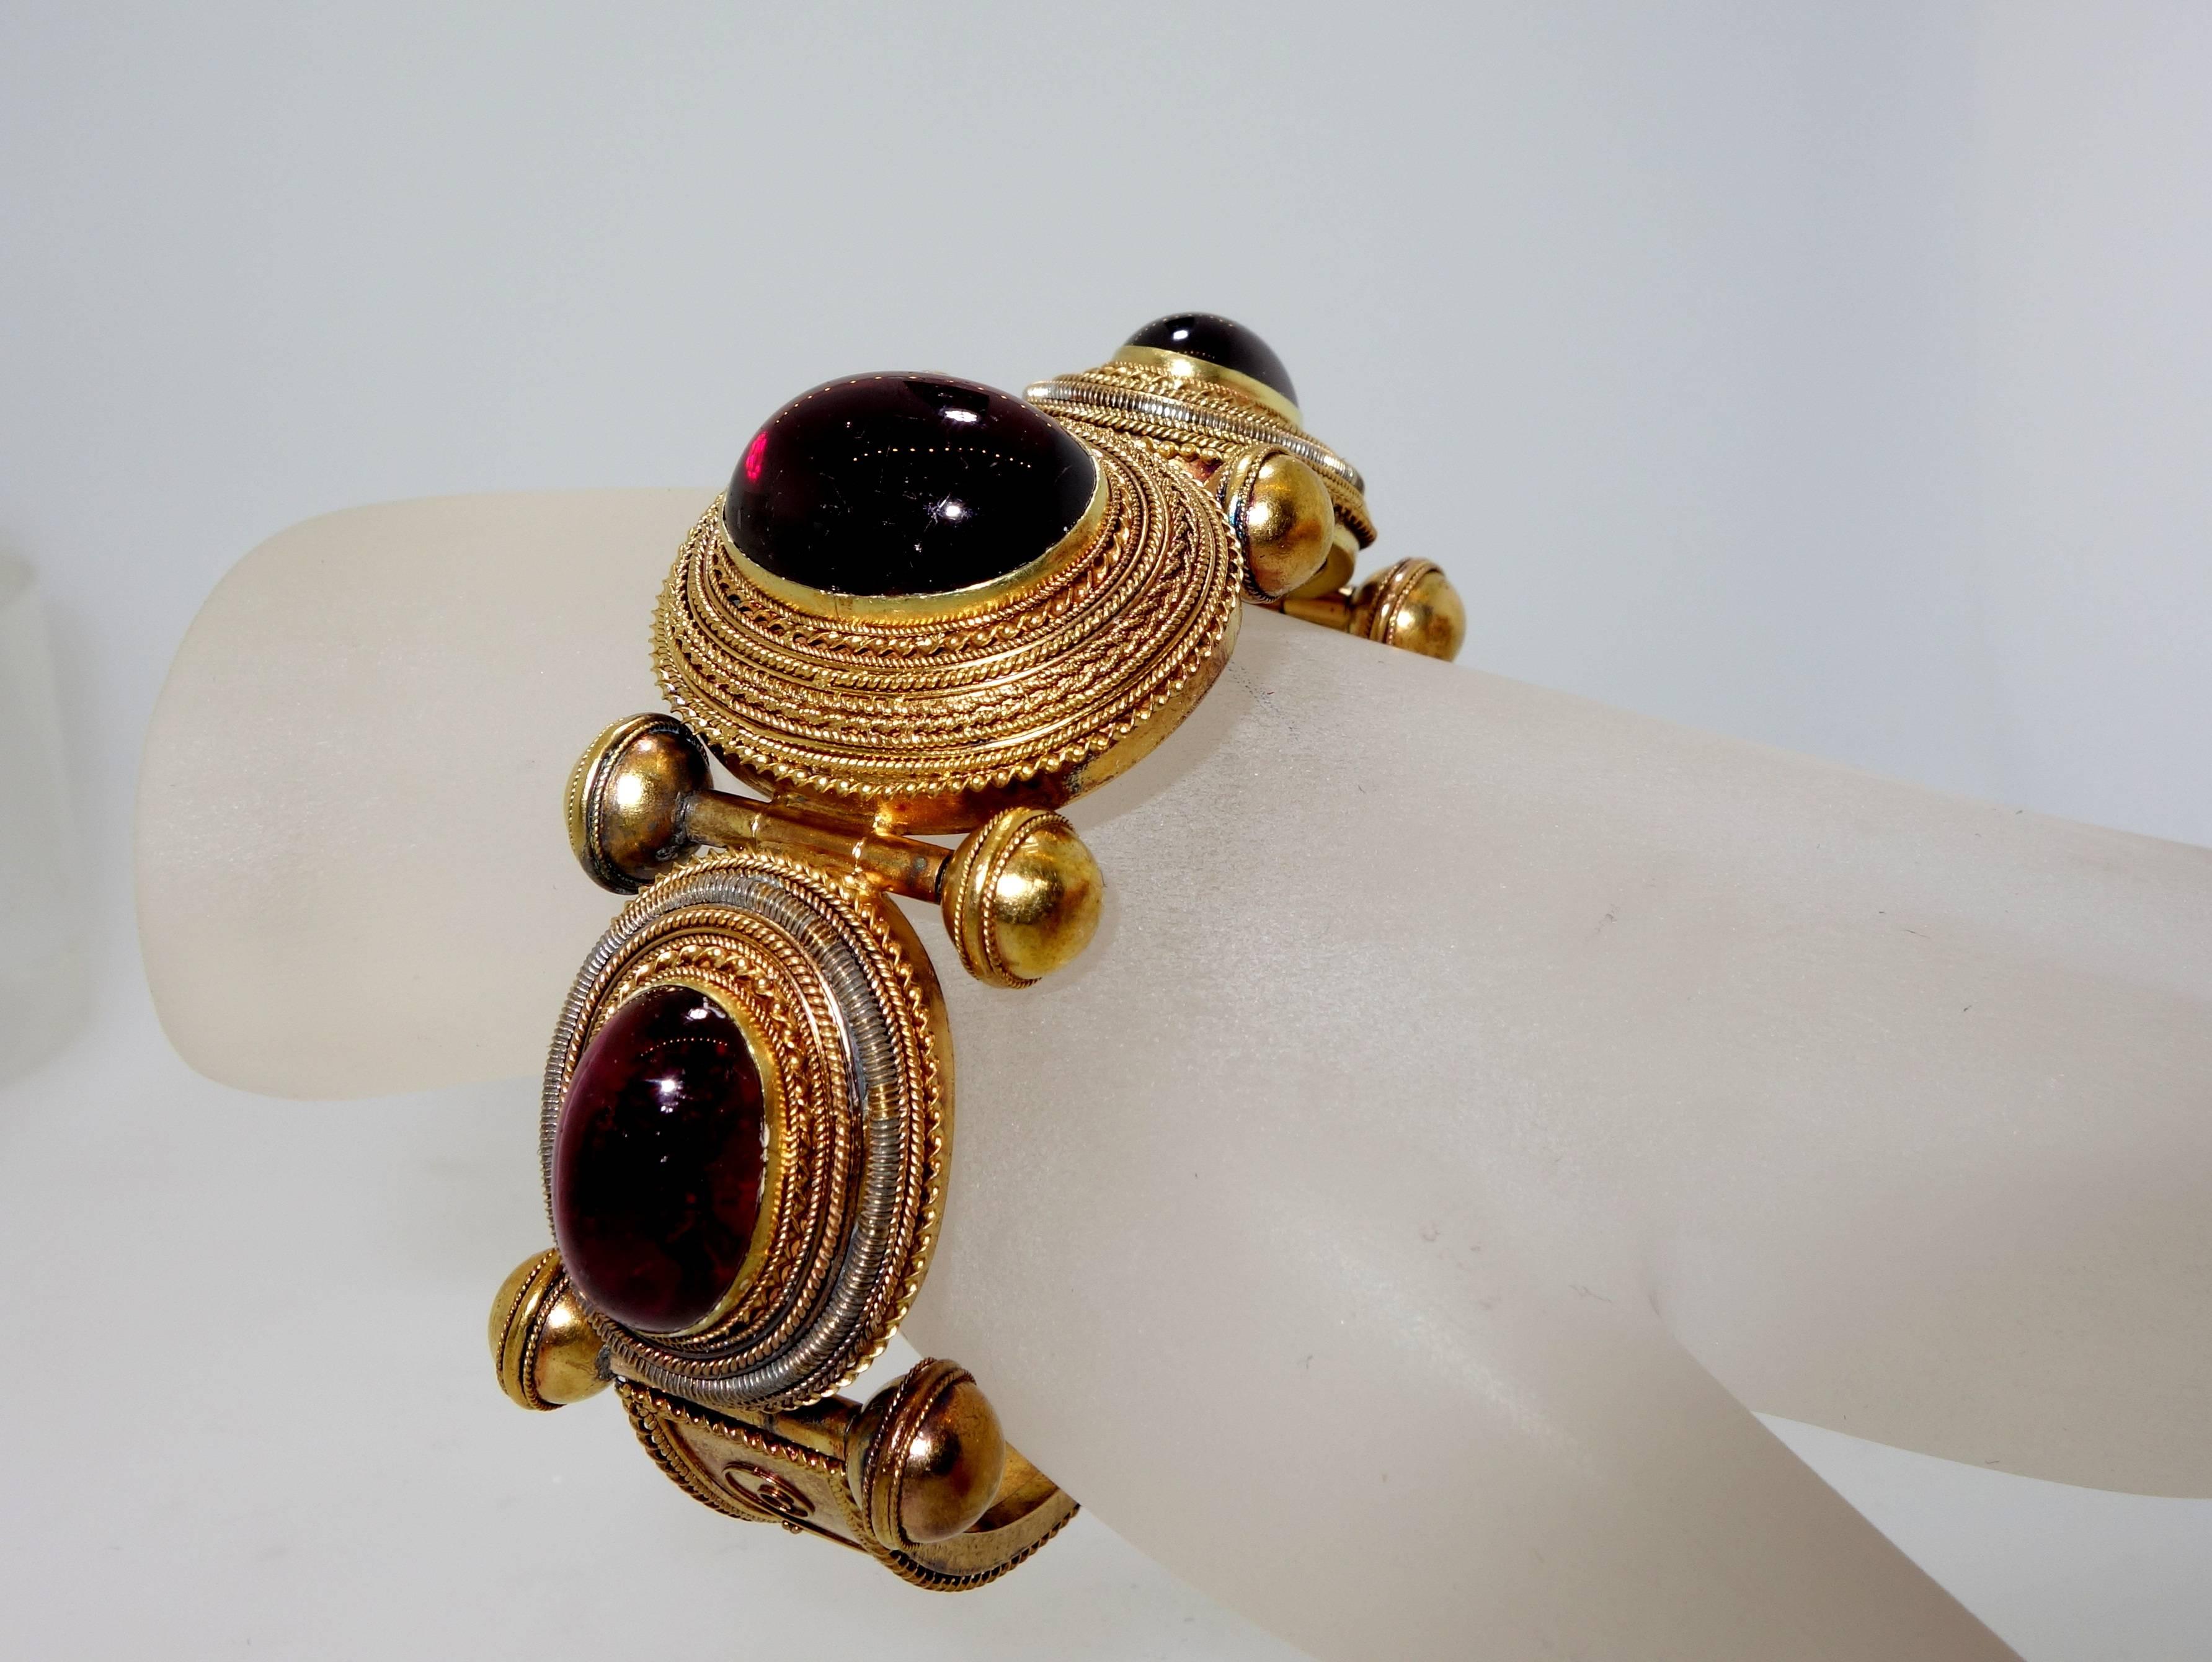 Fine Etruscan revival bead and wire work with three large cabochon cut deep bright red garnets (referred to as carbuncles).  This bracelet has an interior dimension of 2.25 inches.  While there are no marks, this piece is probably American, late